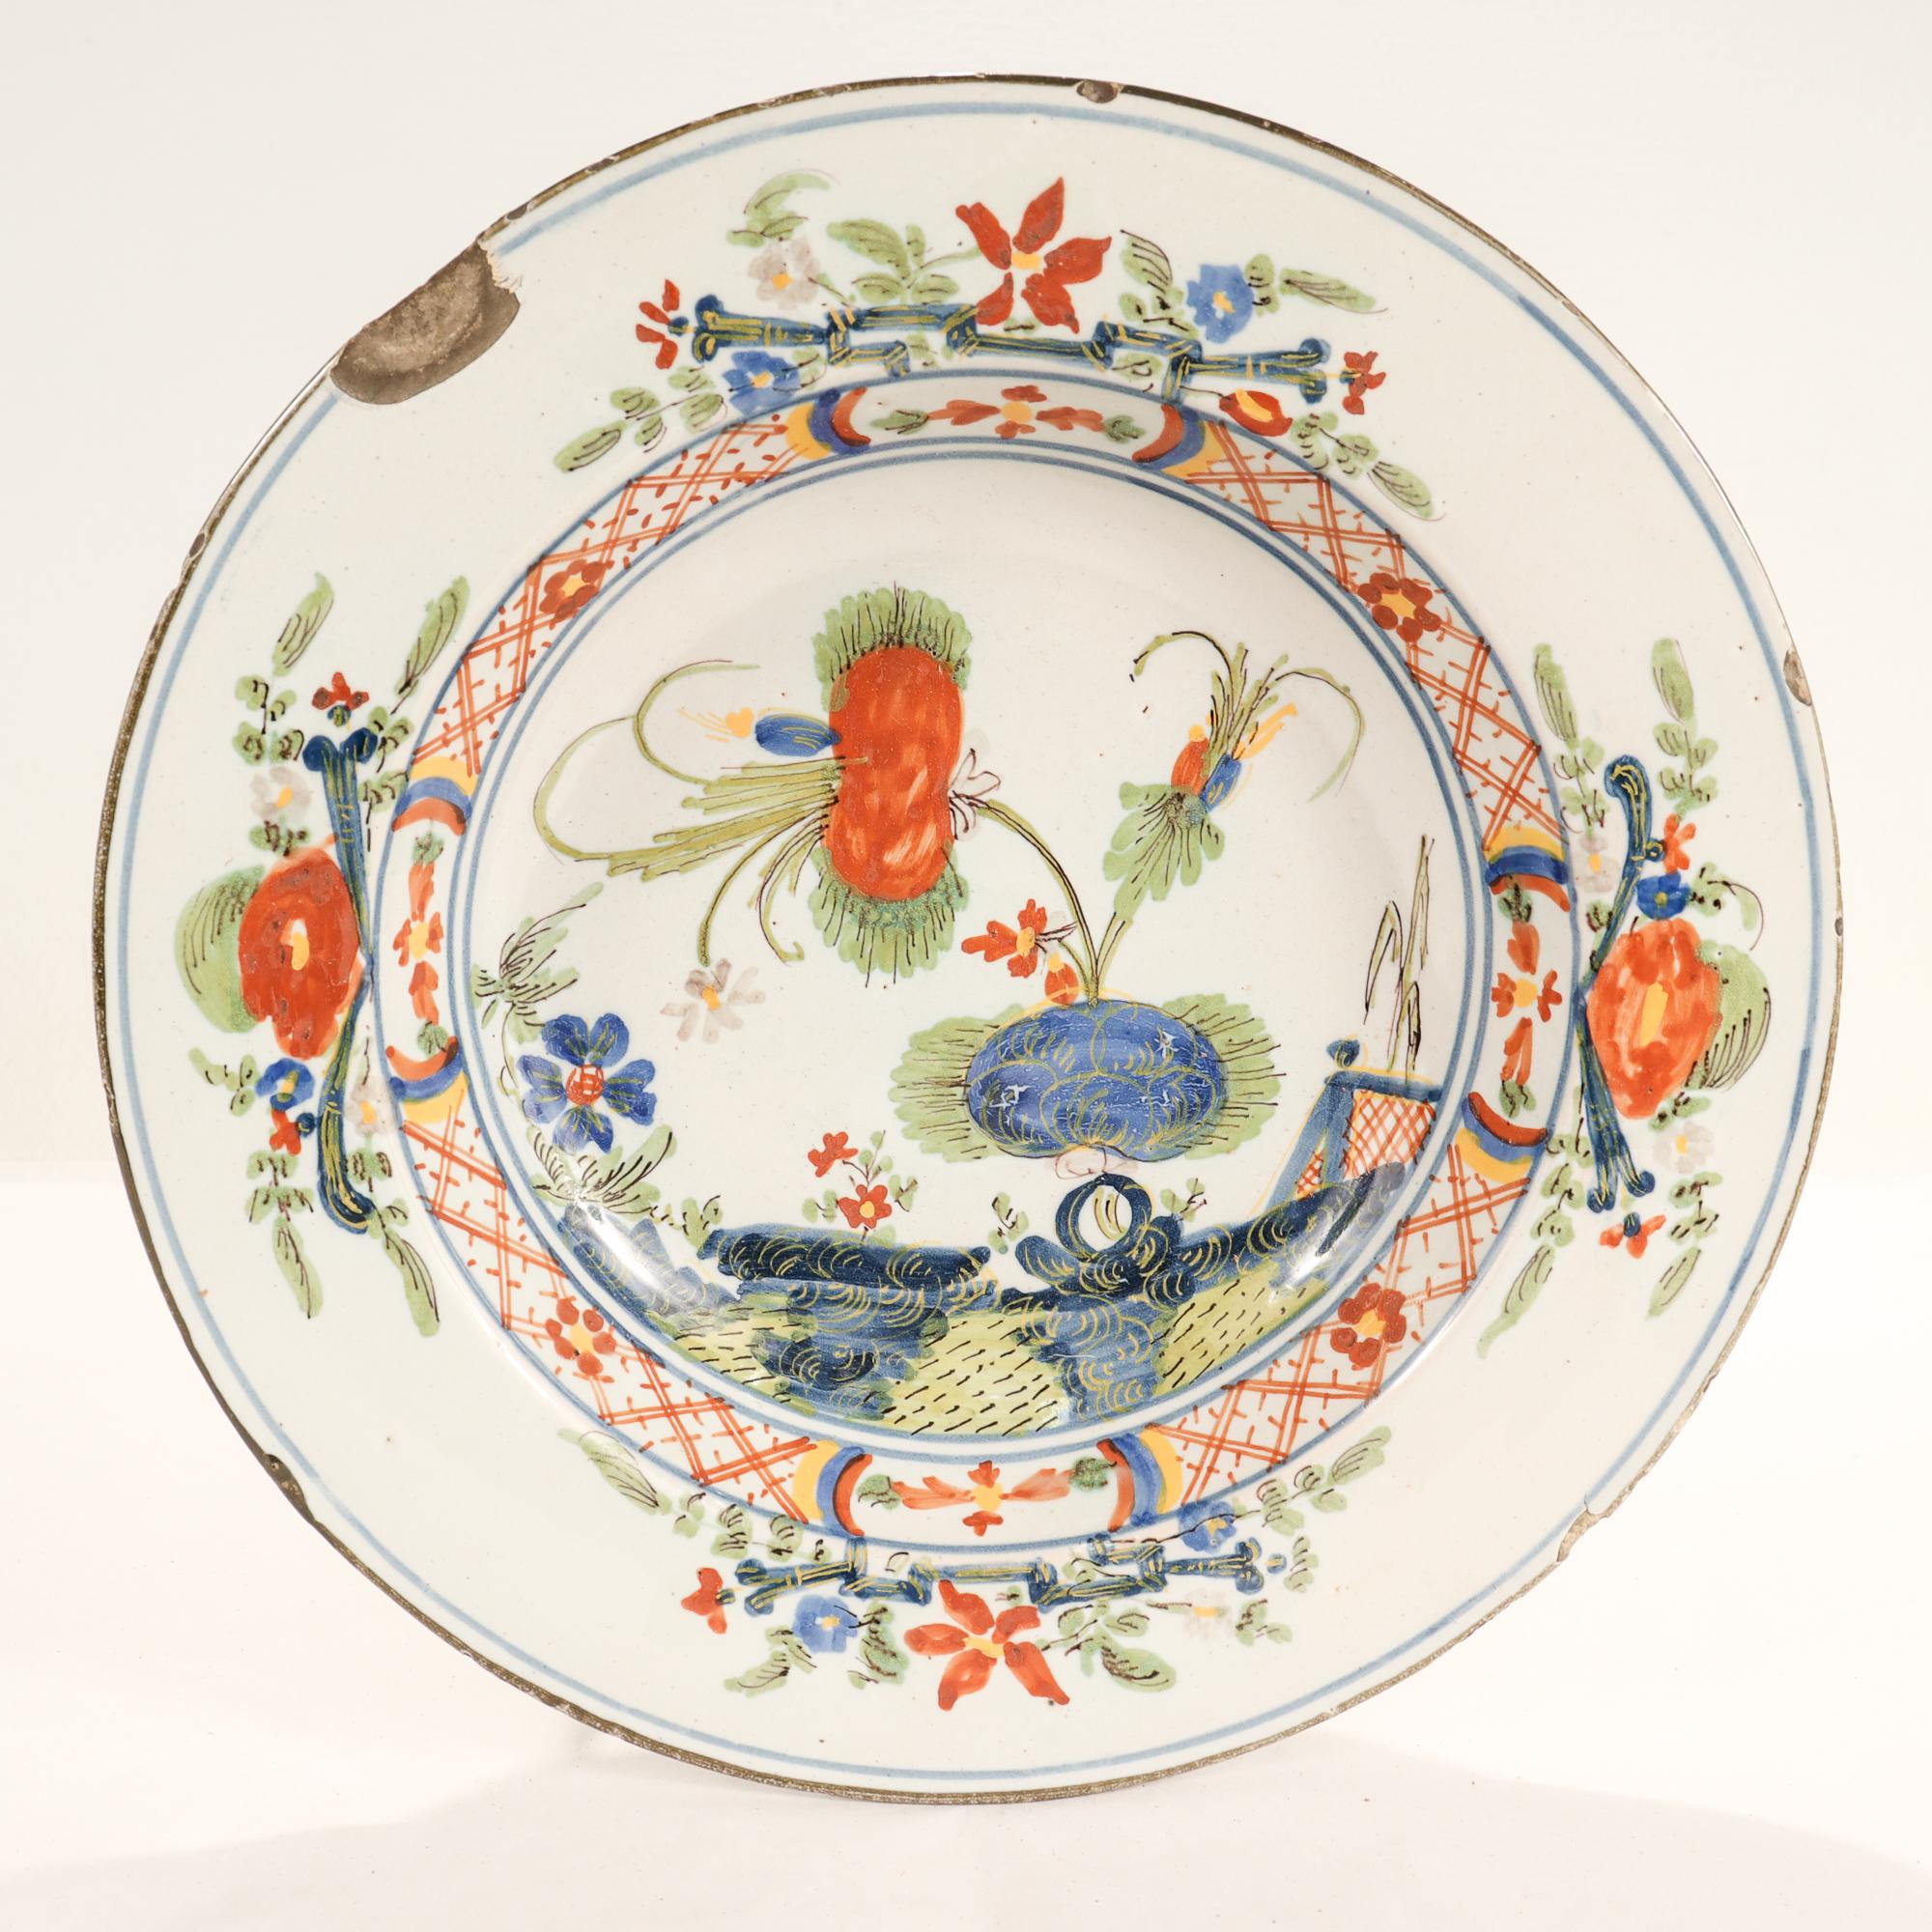 A fine antique 18th century Dutch Delft bowl.

With painted floral chinoiserie decoration throughout in red, blue, yellow, & green.

The reverse bears an old store price tag.

Simply a wonderful Dutch Delft bowl!

Date:
Mid-18th